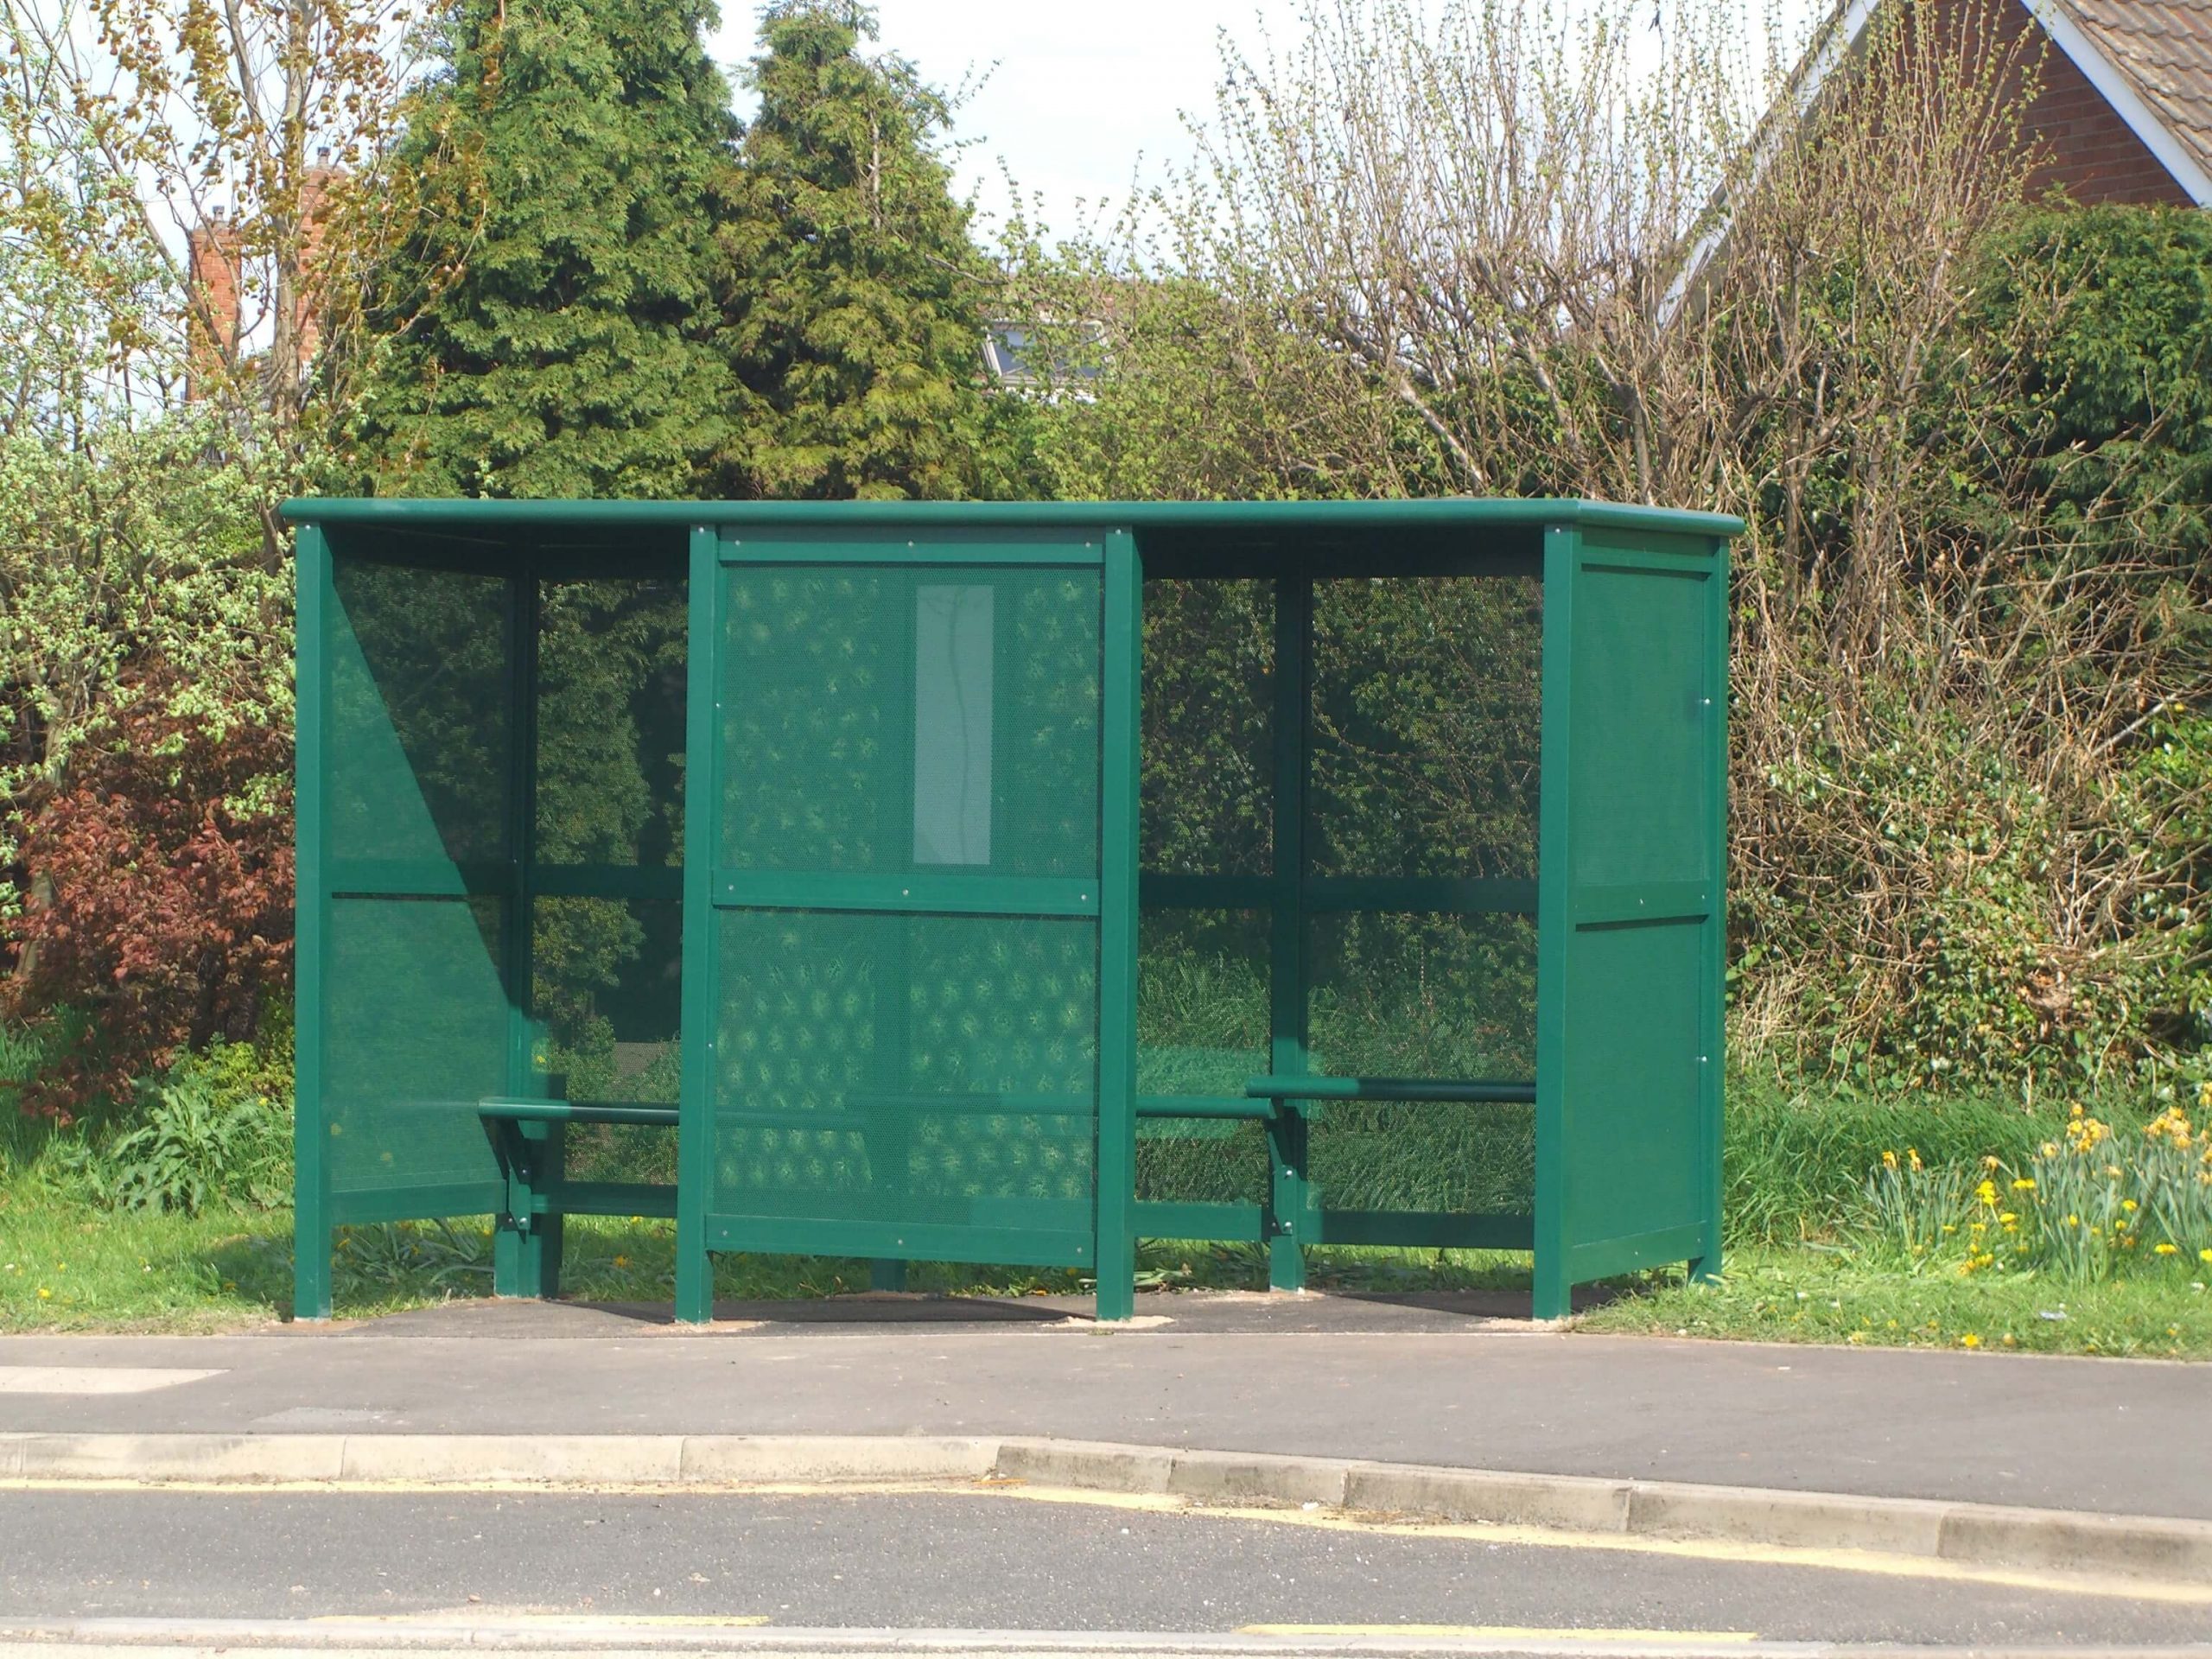 3 Bay Morley Bus shelter double front entry with perforated glazing & perch seating